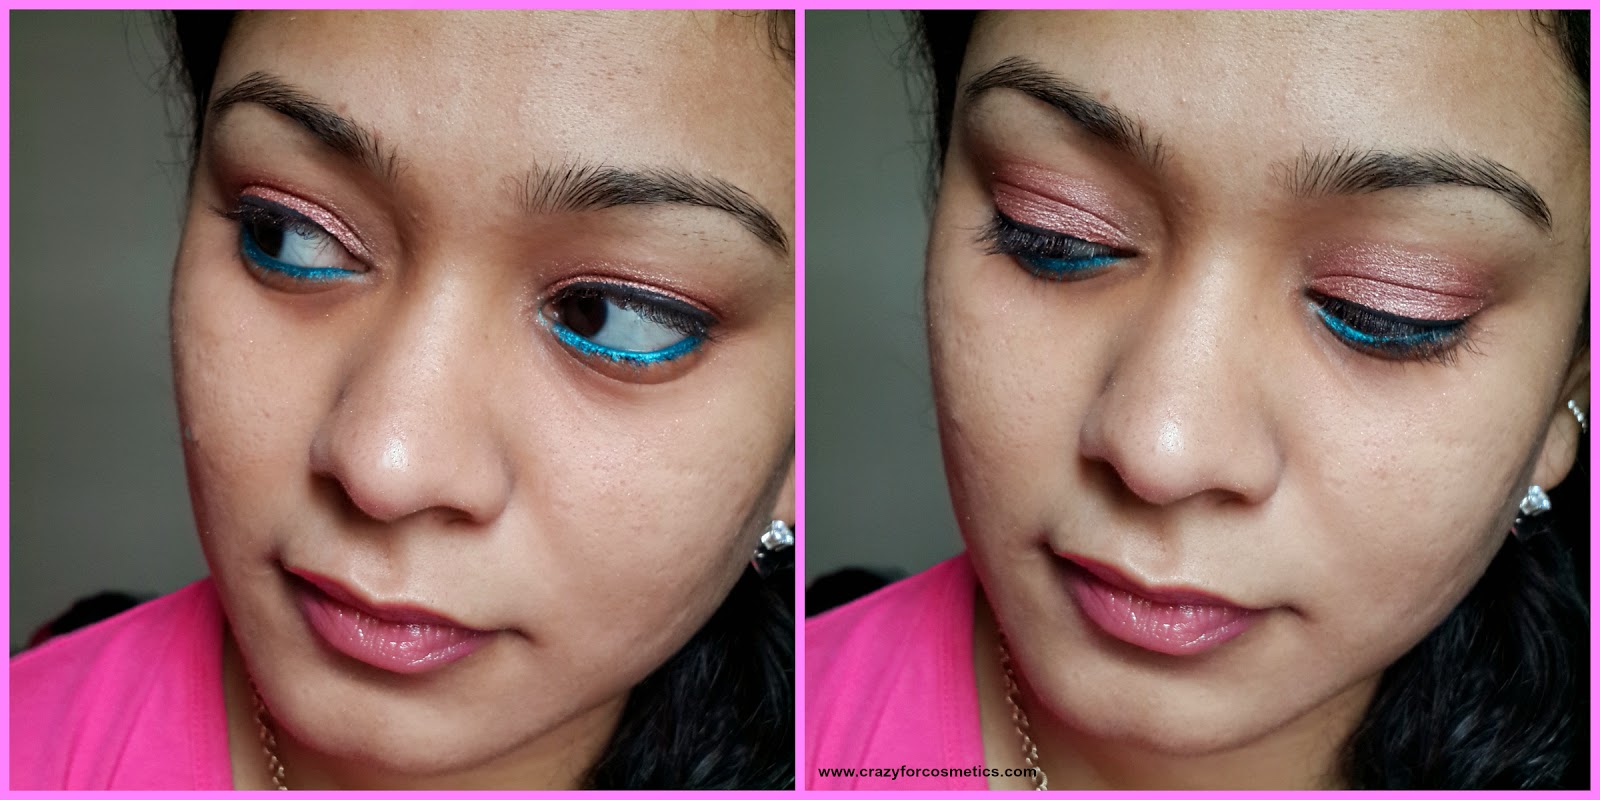 faces canada glam on mono eyeshadow in ruby quartz-faces canada glam on mono eyeshadow in ruby quartz review-faces canada glam on mono eyeshadow in ruby quartz swatches-faces canada glam on mono eyeshadow in ruby quartz India online-eyesadow for navrathri - festive makeup look